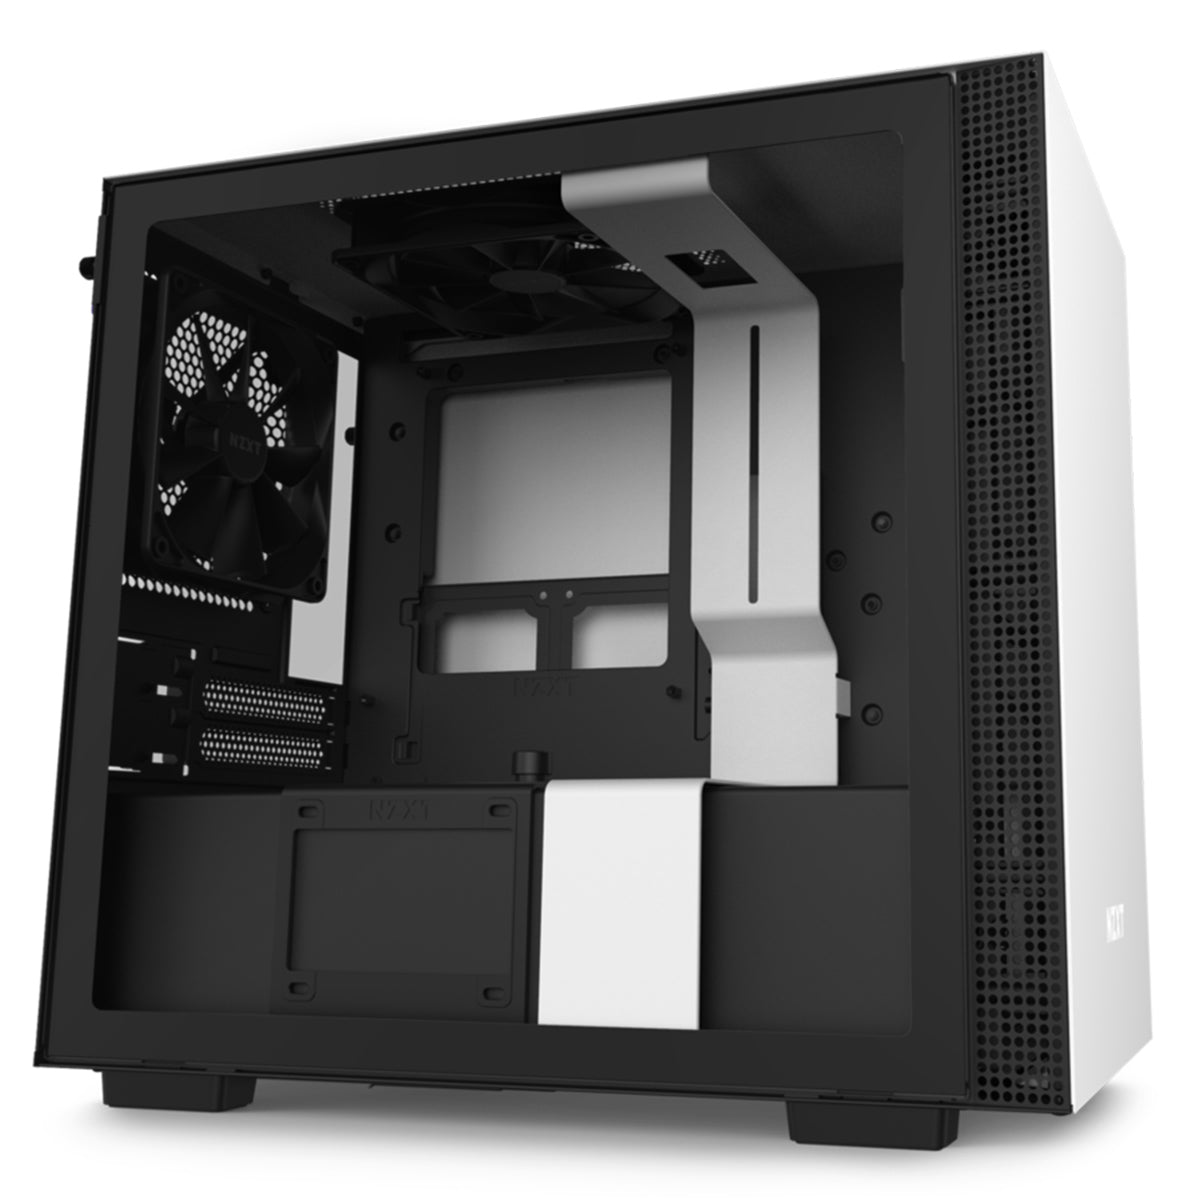 NZXT H210 Compact Mini-ITX Case Cabinet with Tempered Glass and Two 120mm Pre-Installed Fans